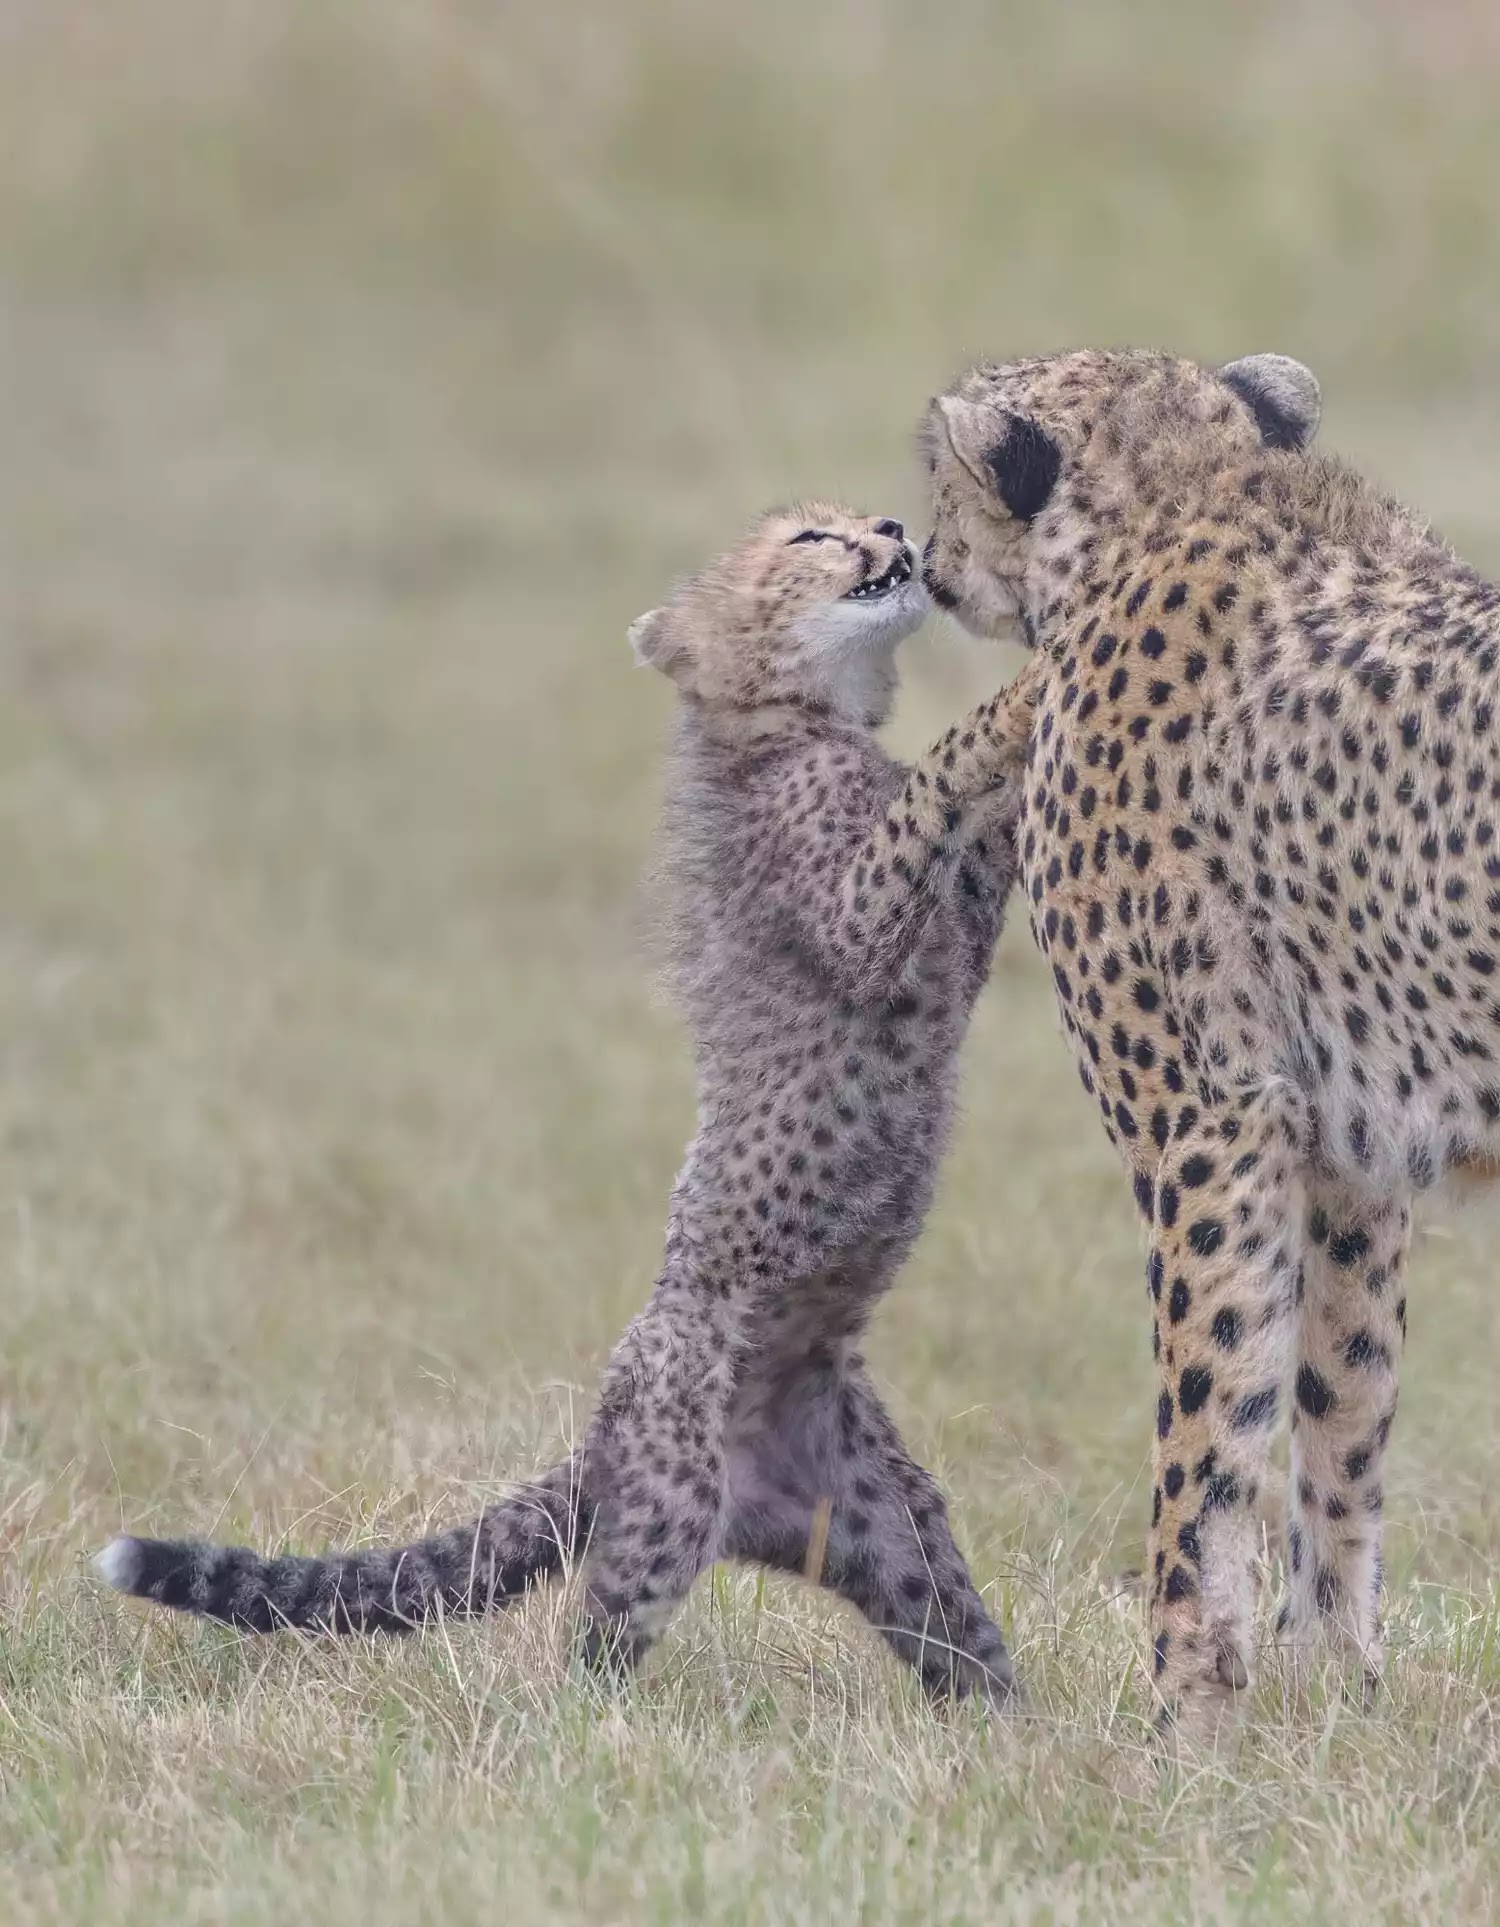 A mother Cheetah playing with her cub